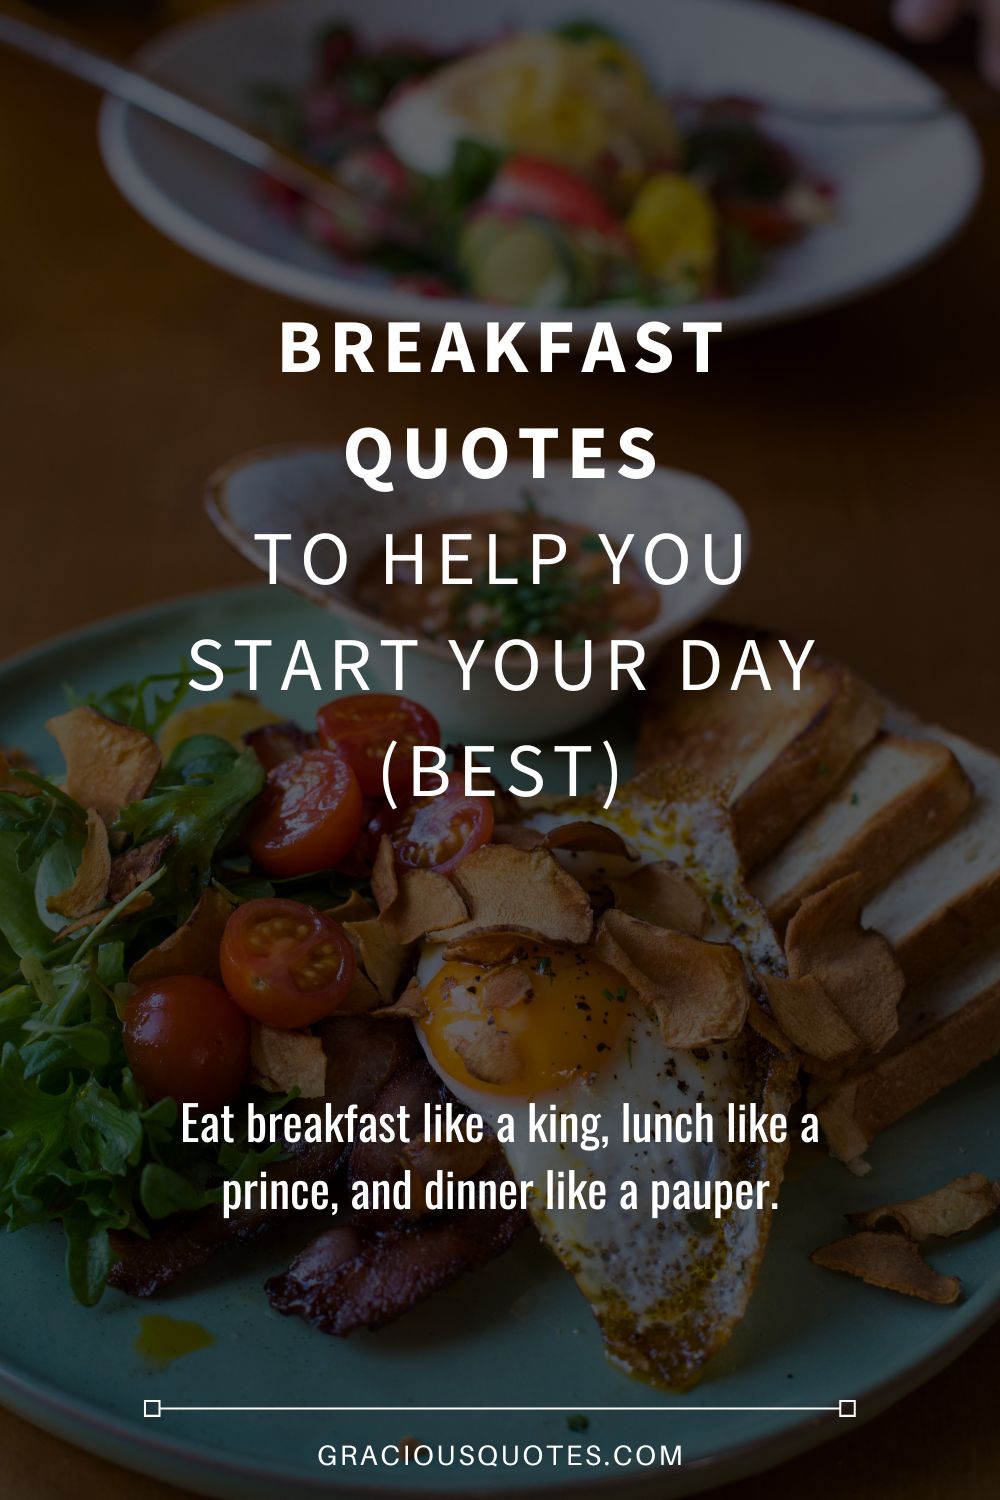 Breakfast Quotes to Help You Start Your Day (BEST) - Gracious Quotes